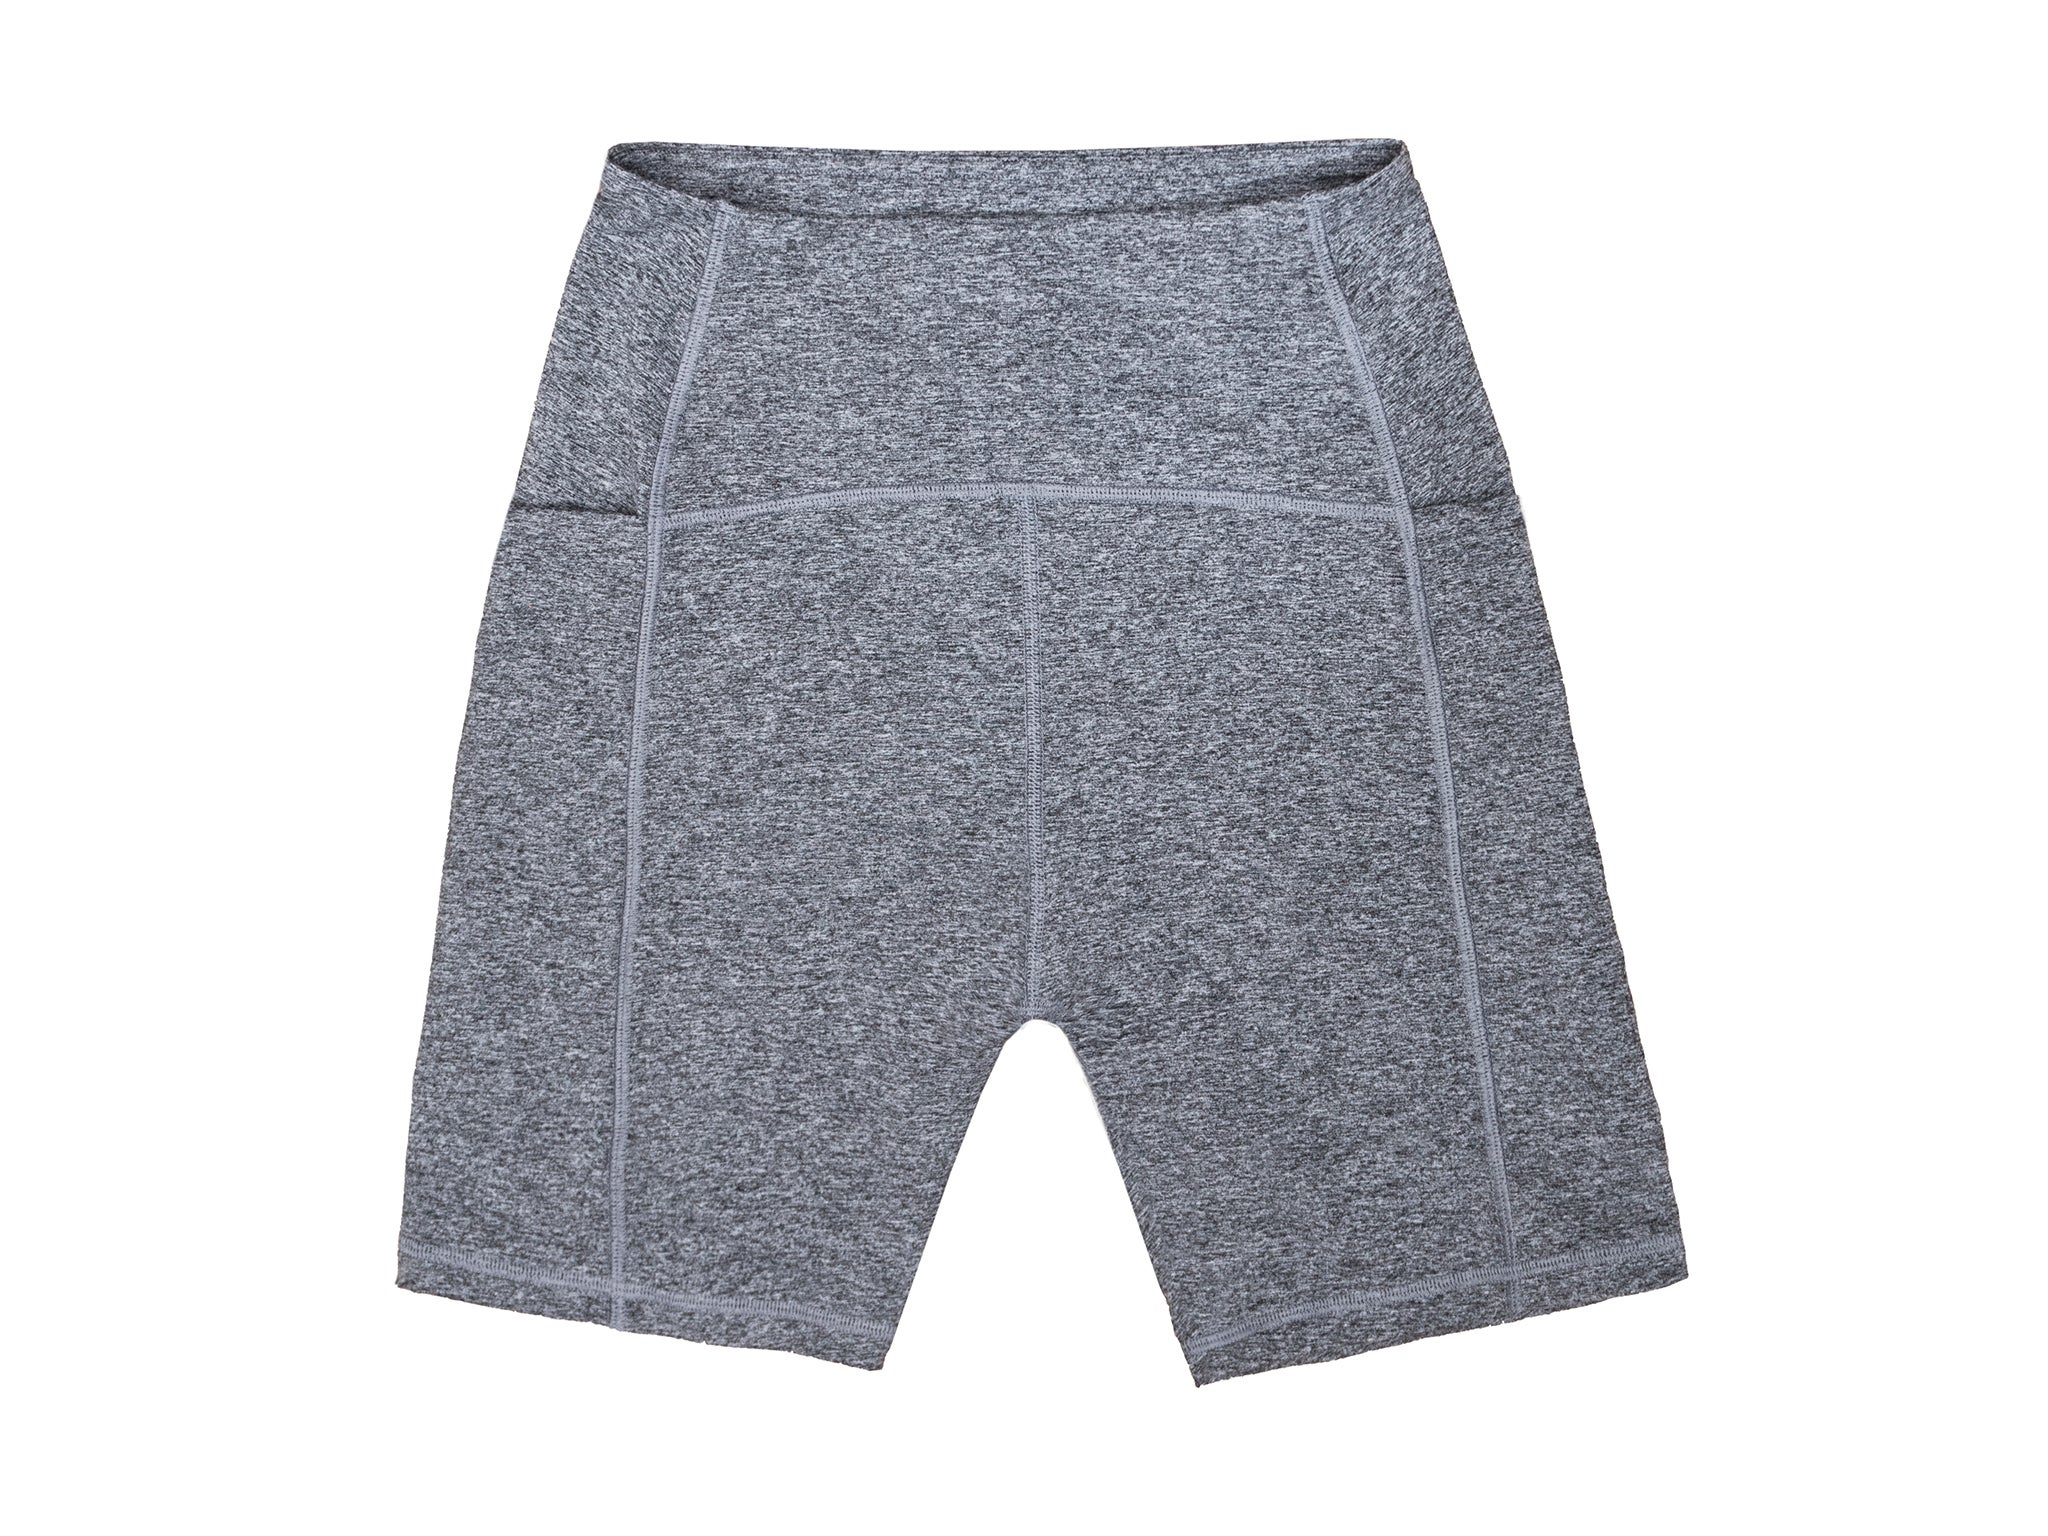 Thinx-cycle-shorts-indybest-resuable-sanitary